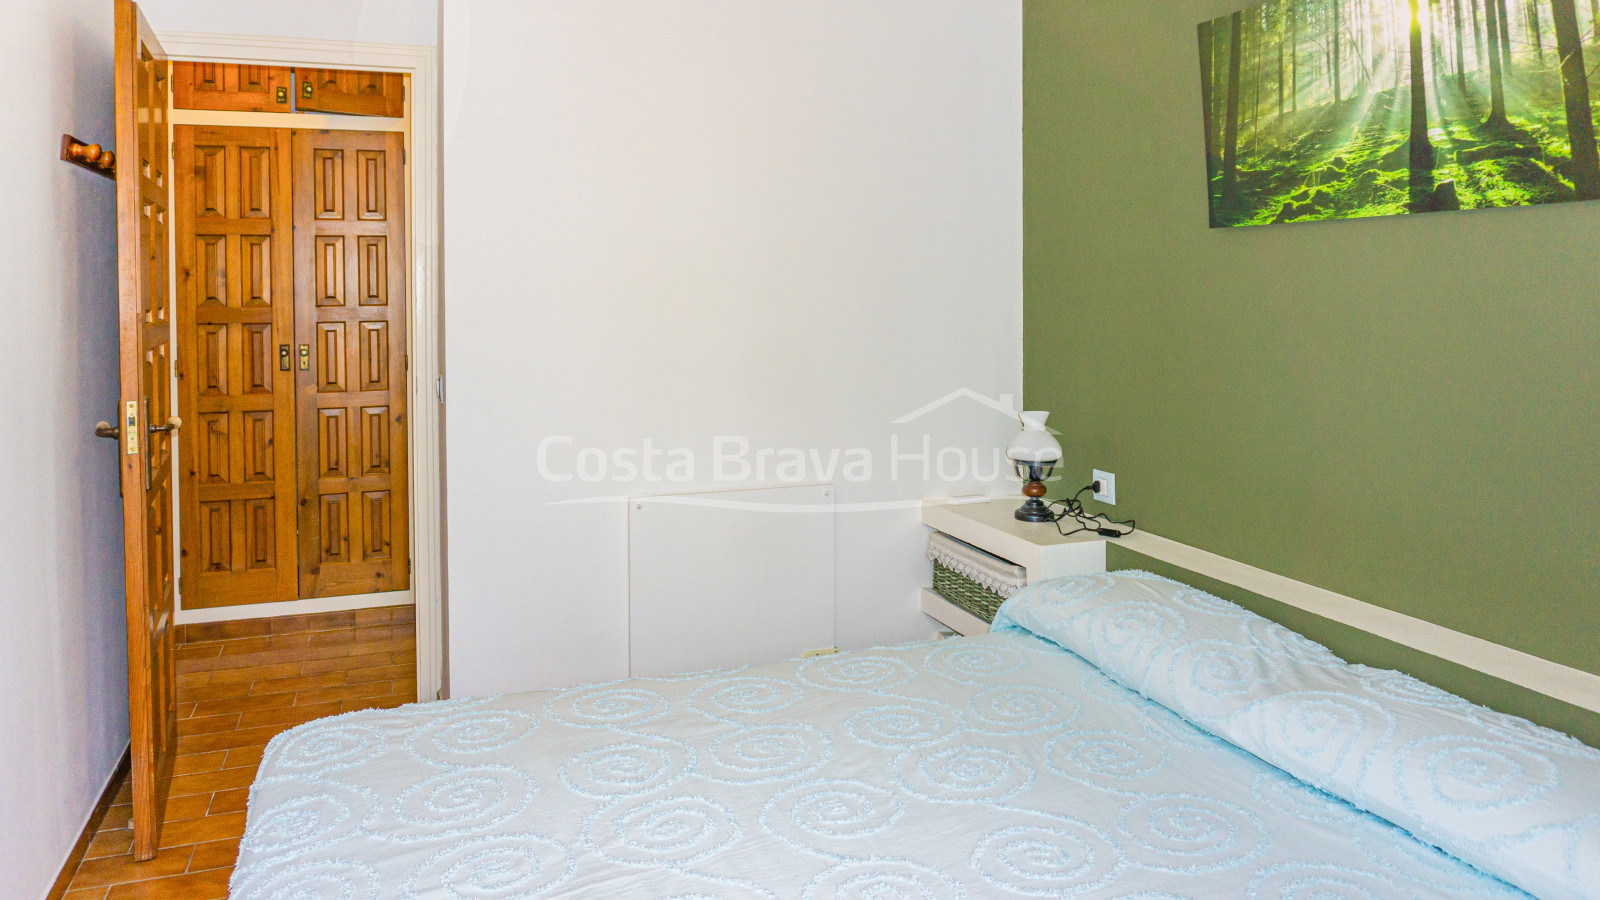 Flat in perfect condition for sale in the centre of Calella Palafrugell, 2 min walk from the beach